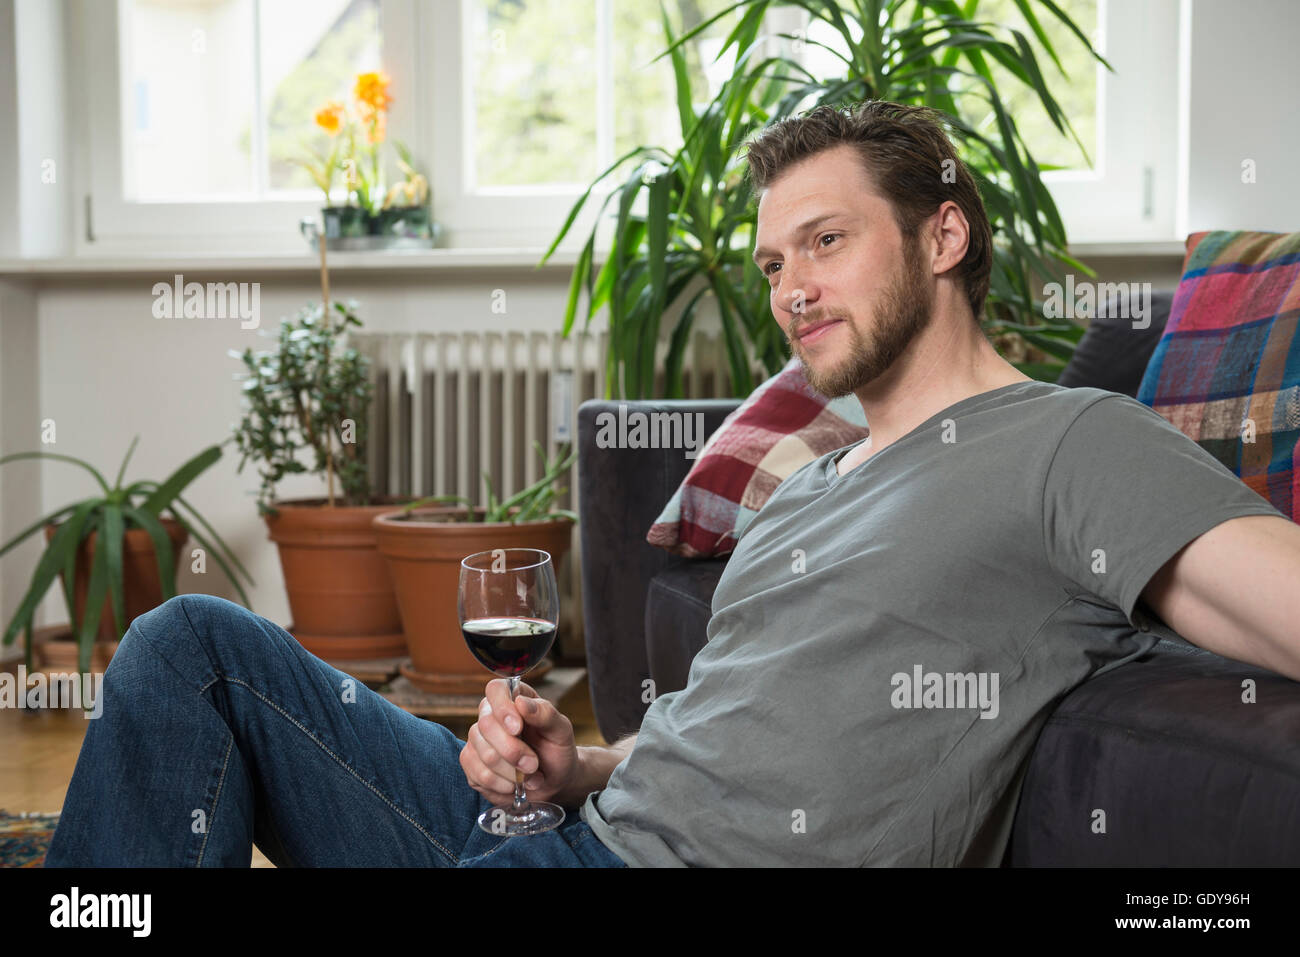 Thoughful mid adult man drinking red wine in living room, Munich, Bavaria, Germany Stock Photo